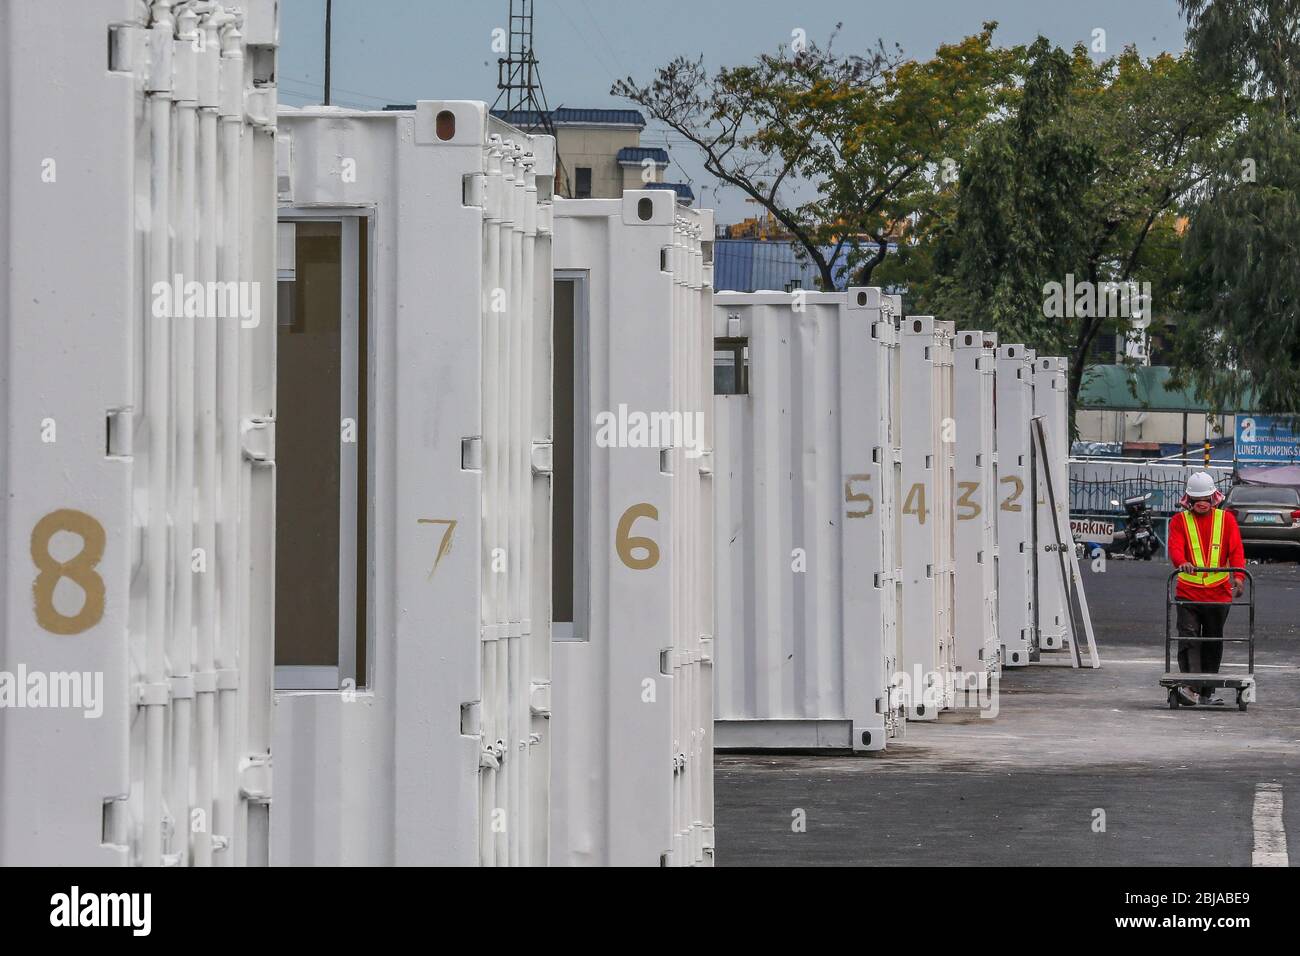 Manila. 29th Apr, 2020. Photo taken on April 29, 2020 shows the containers that will be converted into temporary medical facilities in Manila, the Philippines. Credit: Rouelle Umali/Xinhua/Alamy Live News Stock Photo